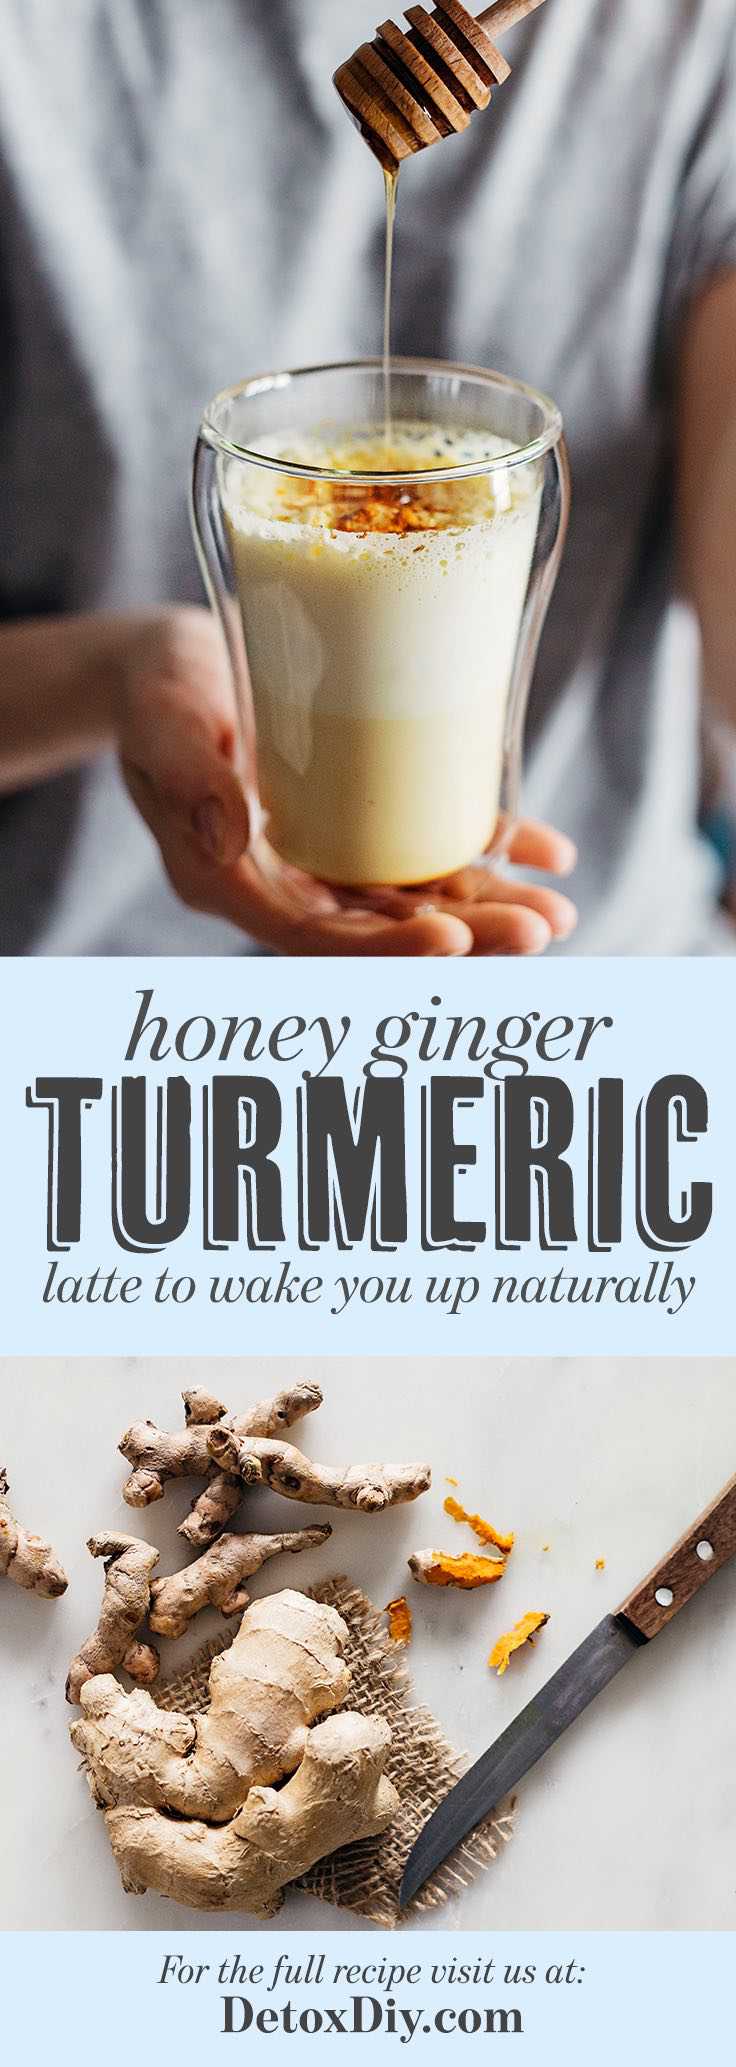 Wake up natural with this energy boosting honey ginger turmeric latte.